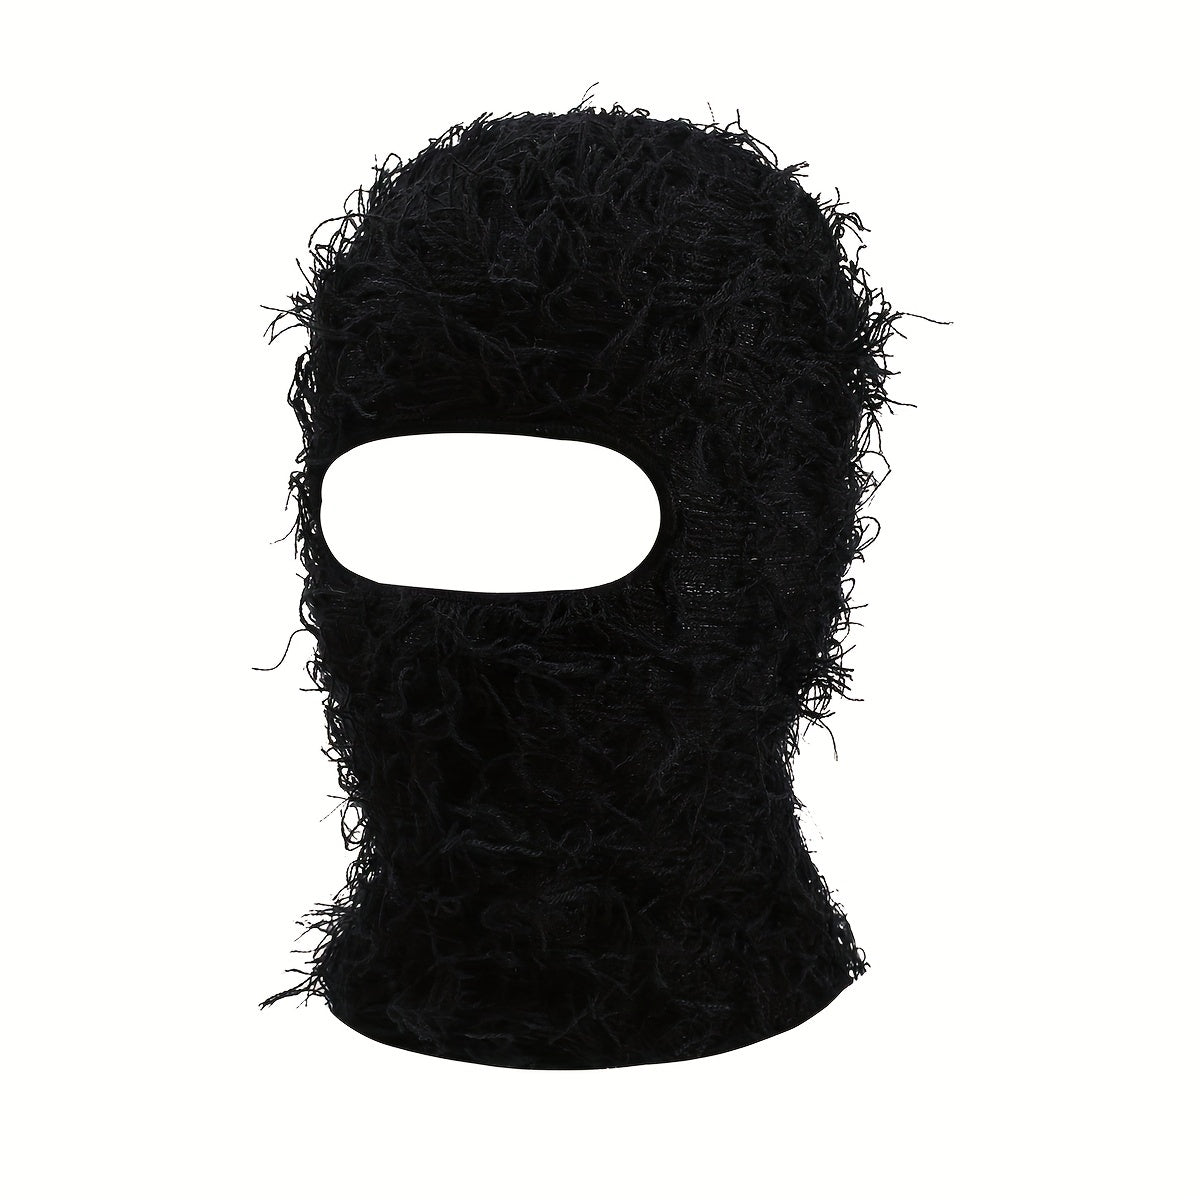 Foxeve Ski Mask Balaclava Distressed Knitted Face Mask for Men/Women Cold Weather   WindProof